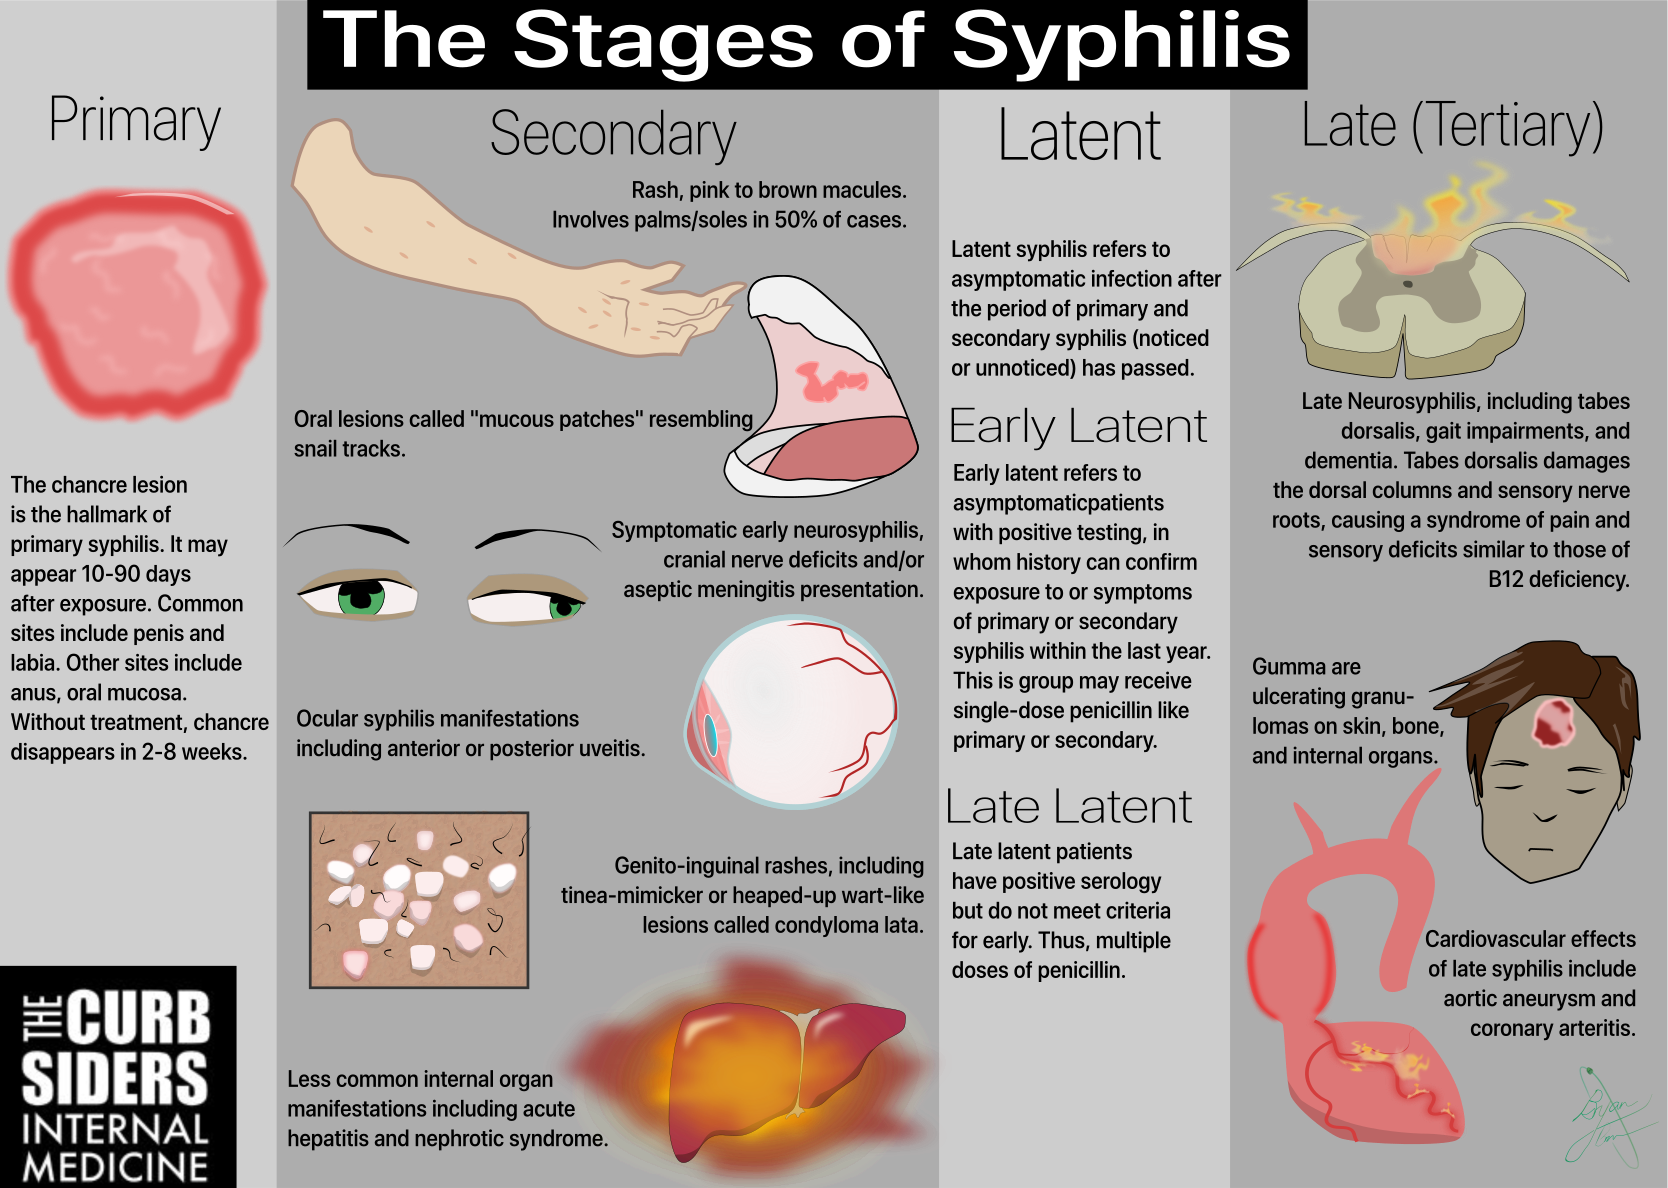 What are the three stages of Syphilis?